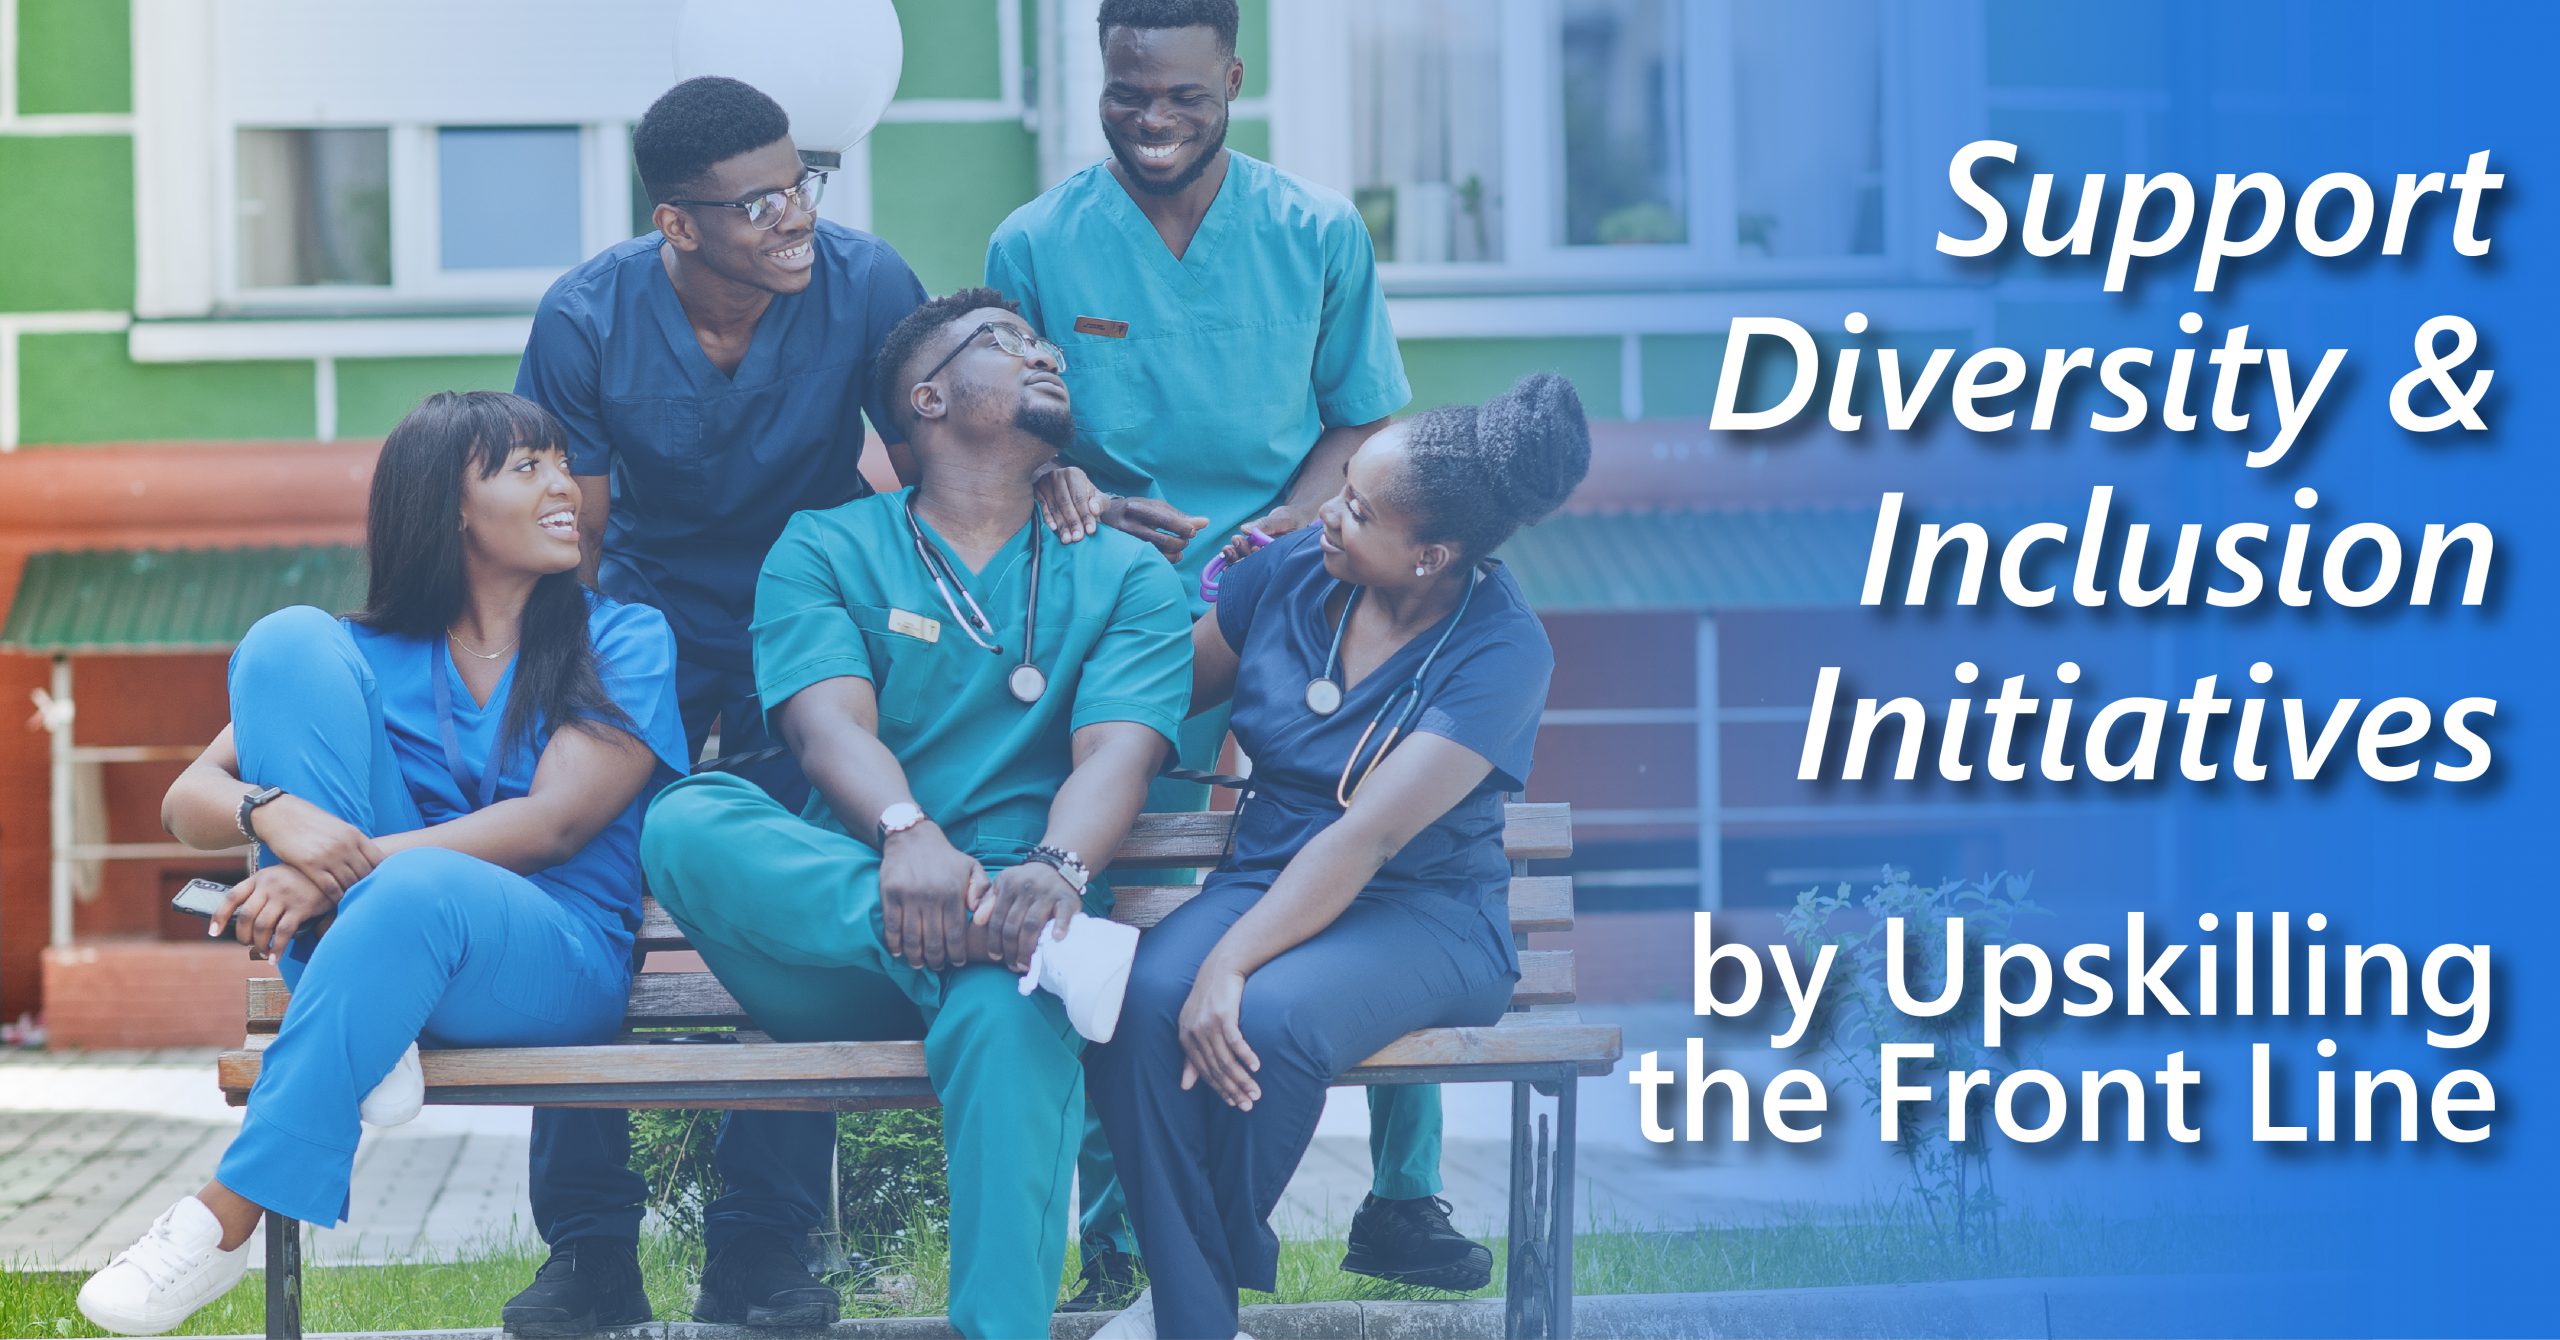 Support Diversity & Inclusion Initiatives by Upskilling the Front Line